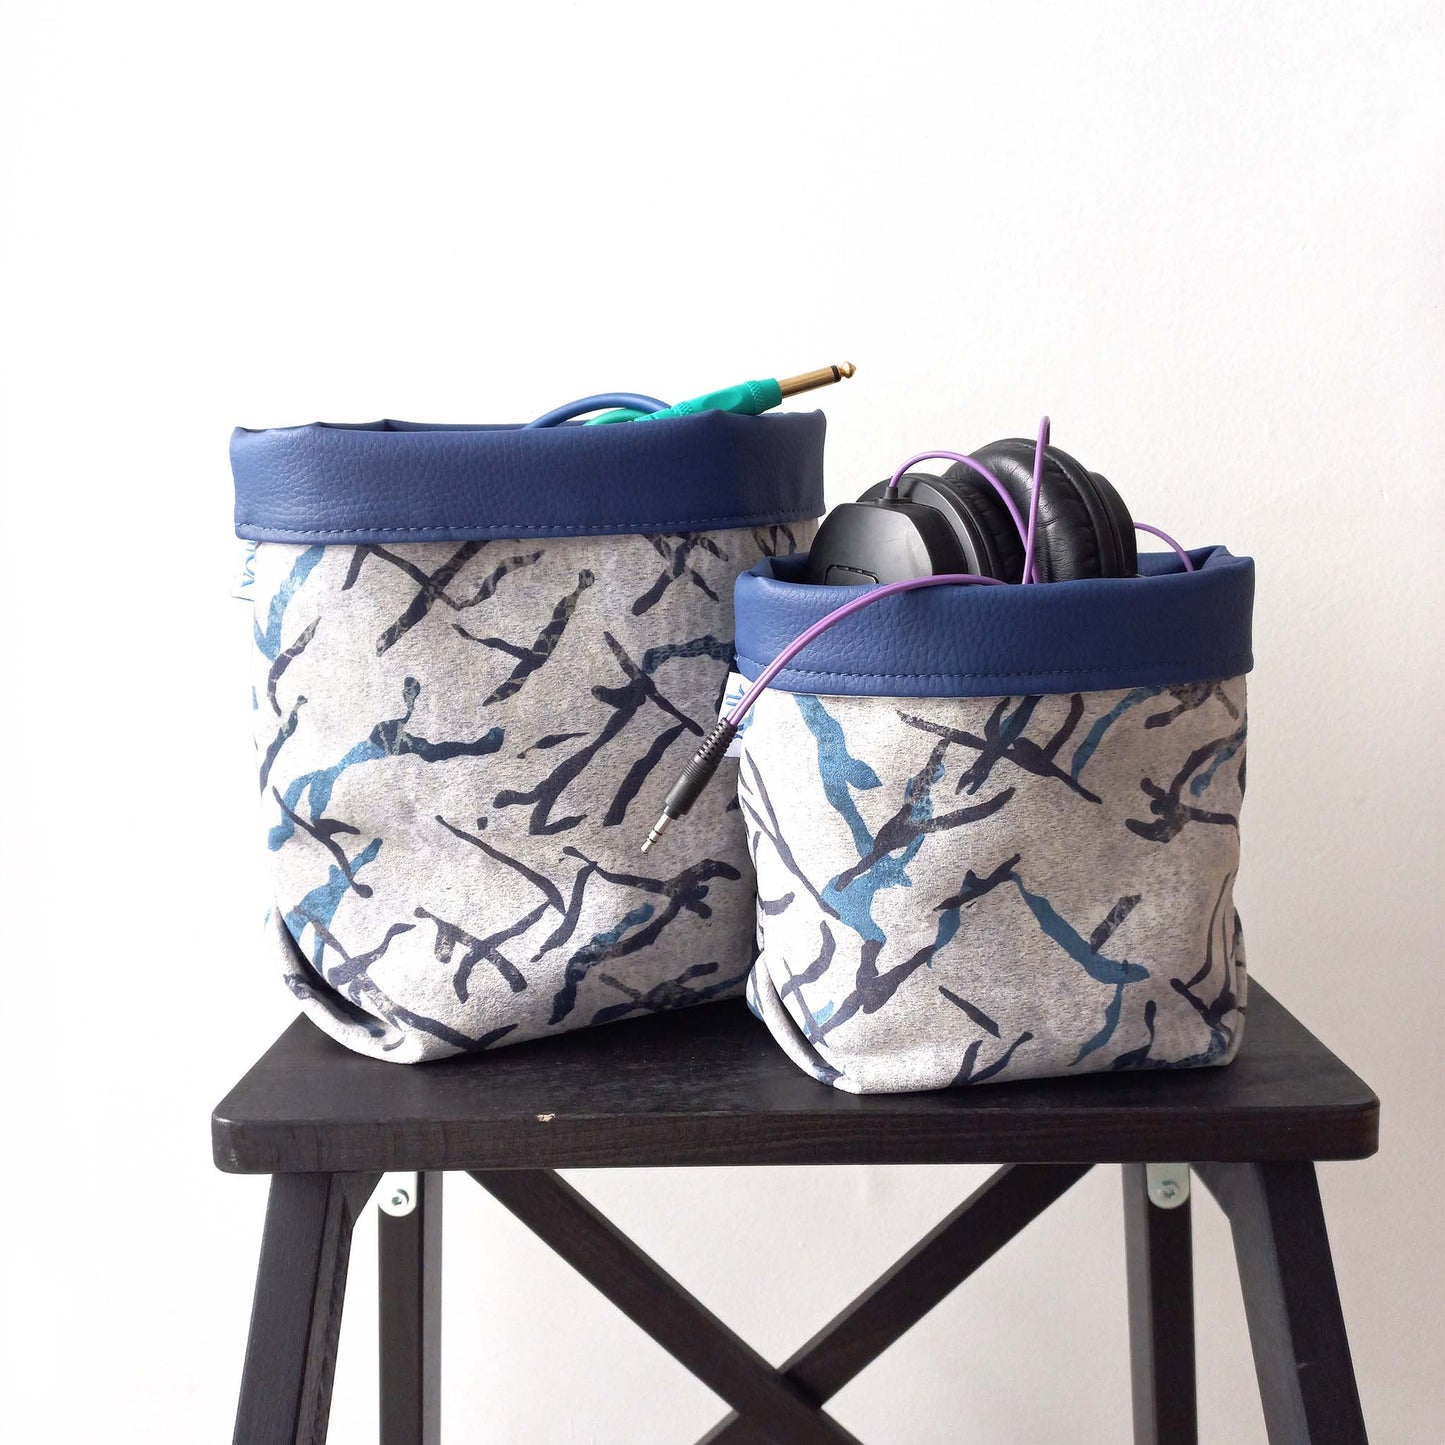 Two printed baskets filled with wires